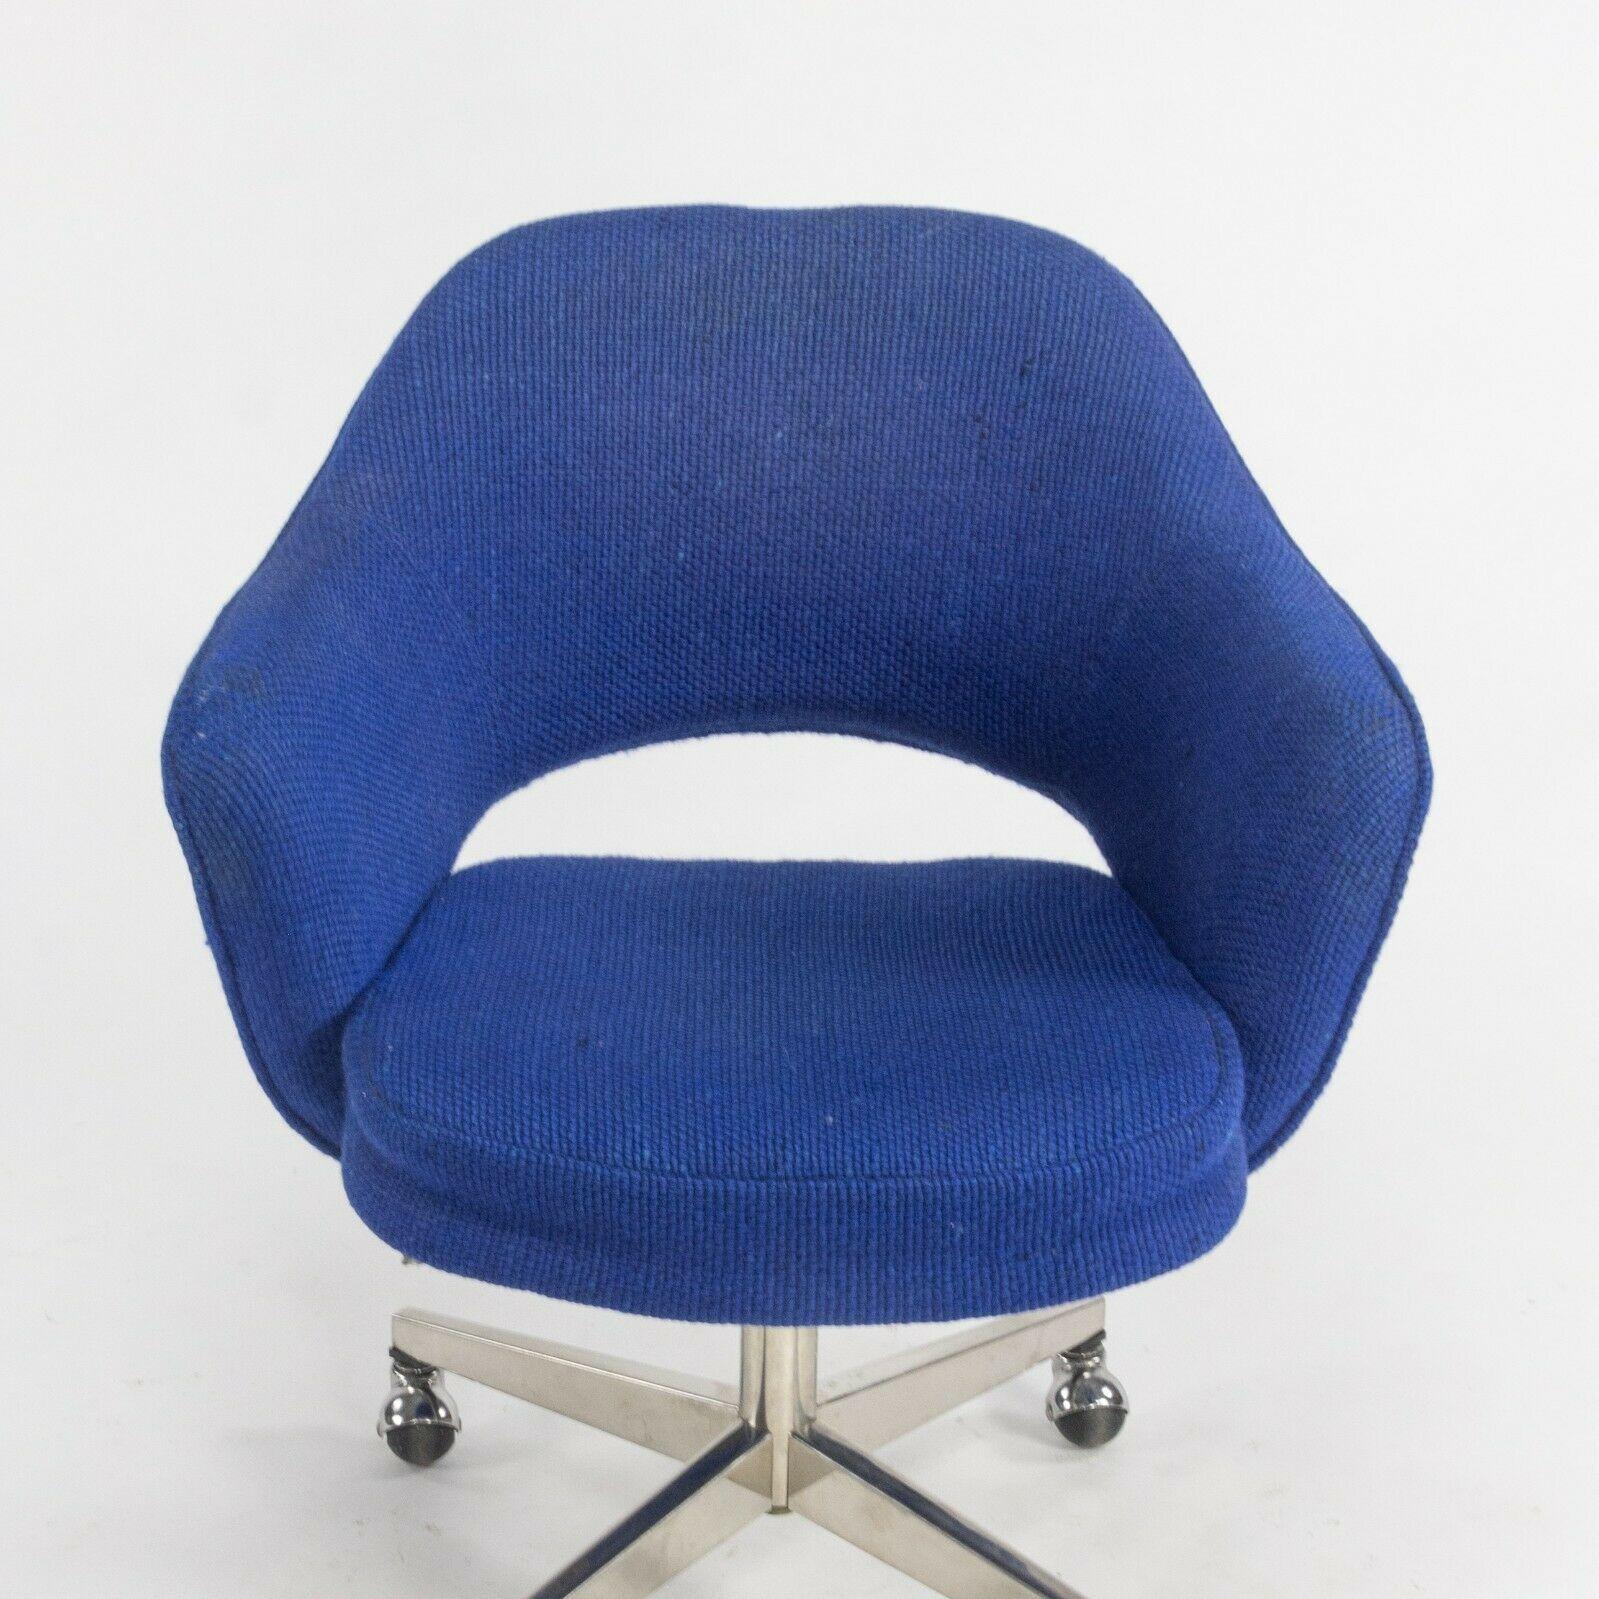 1974 Eero Saarinen for Knoll Rolling Executive Office Chair Original Blue Fabric For Sale 2